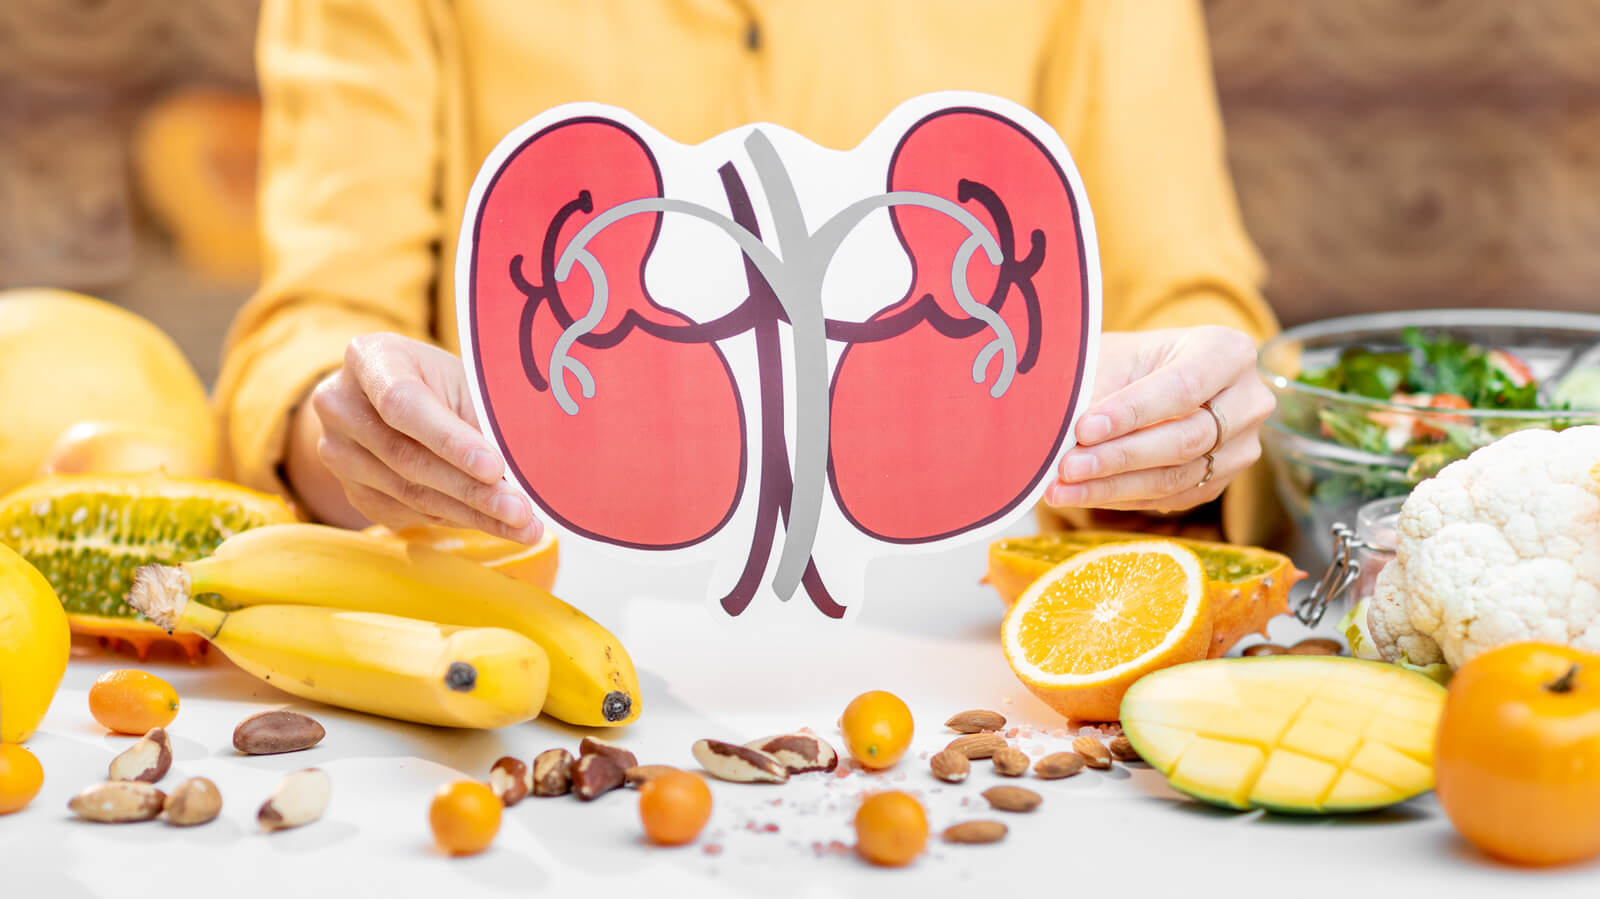 know-7-foods-that-kidney-patients-should-avoid